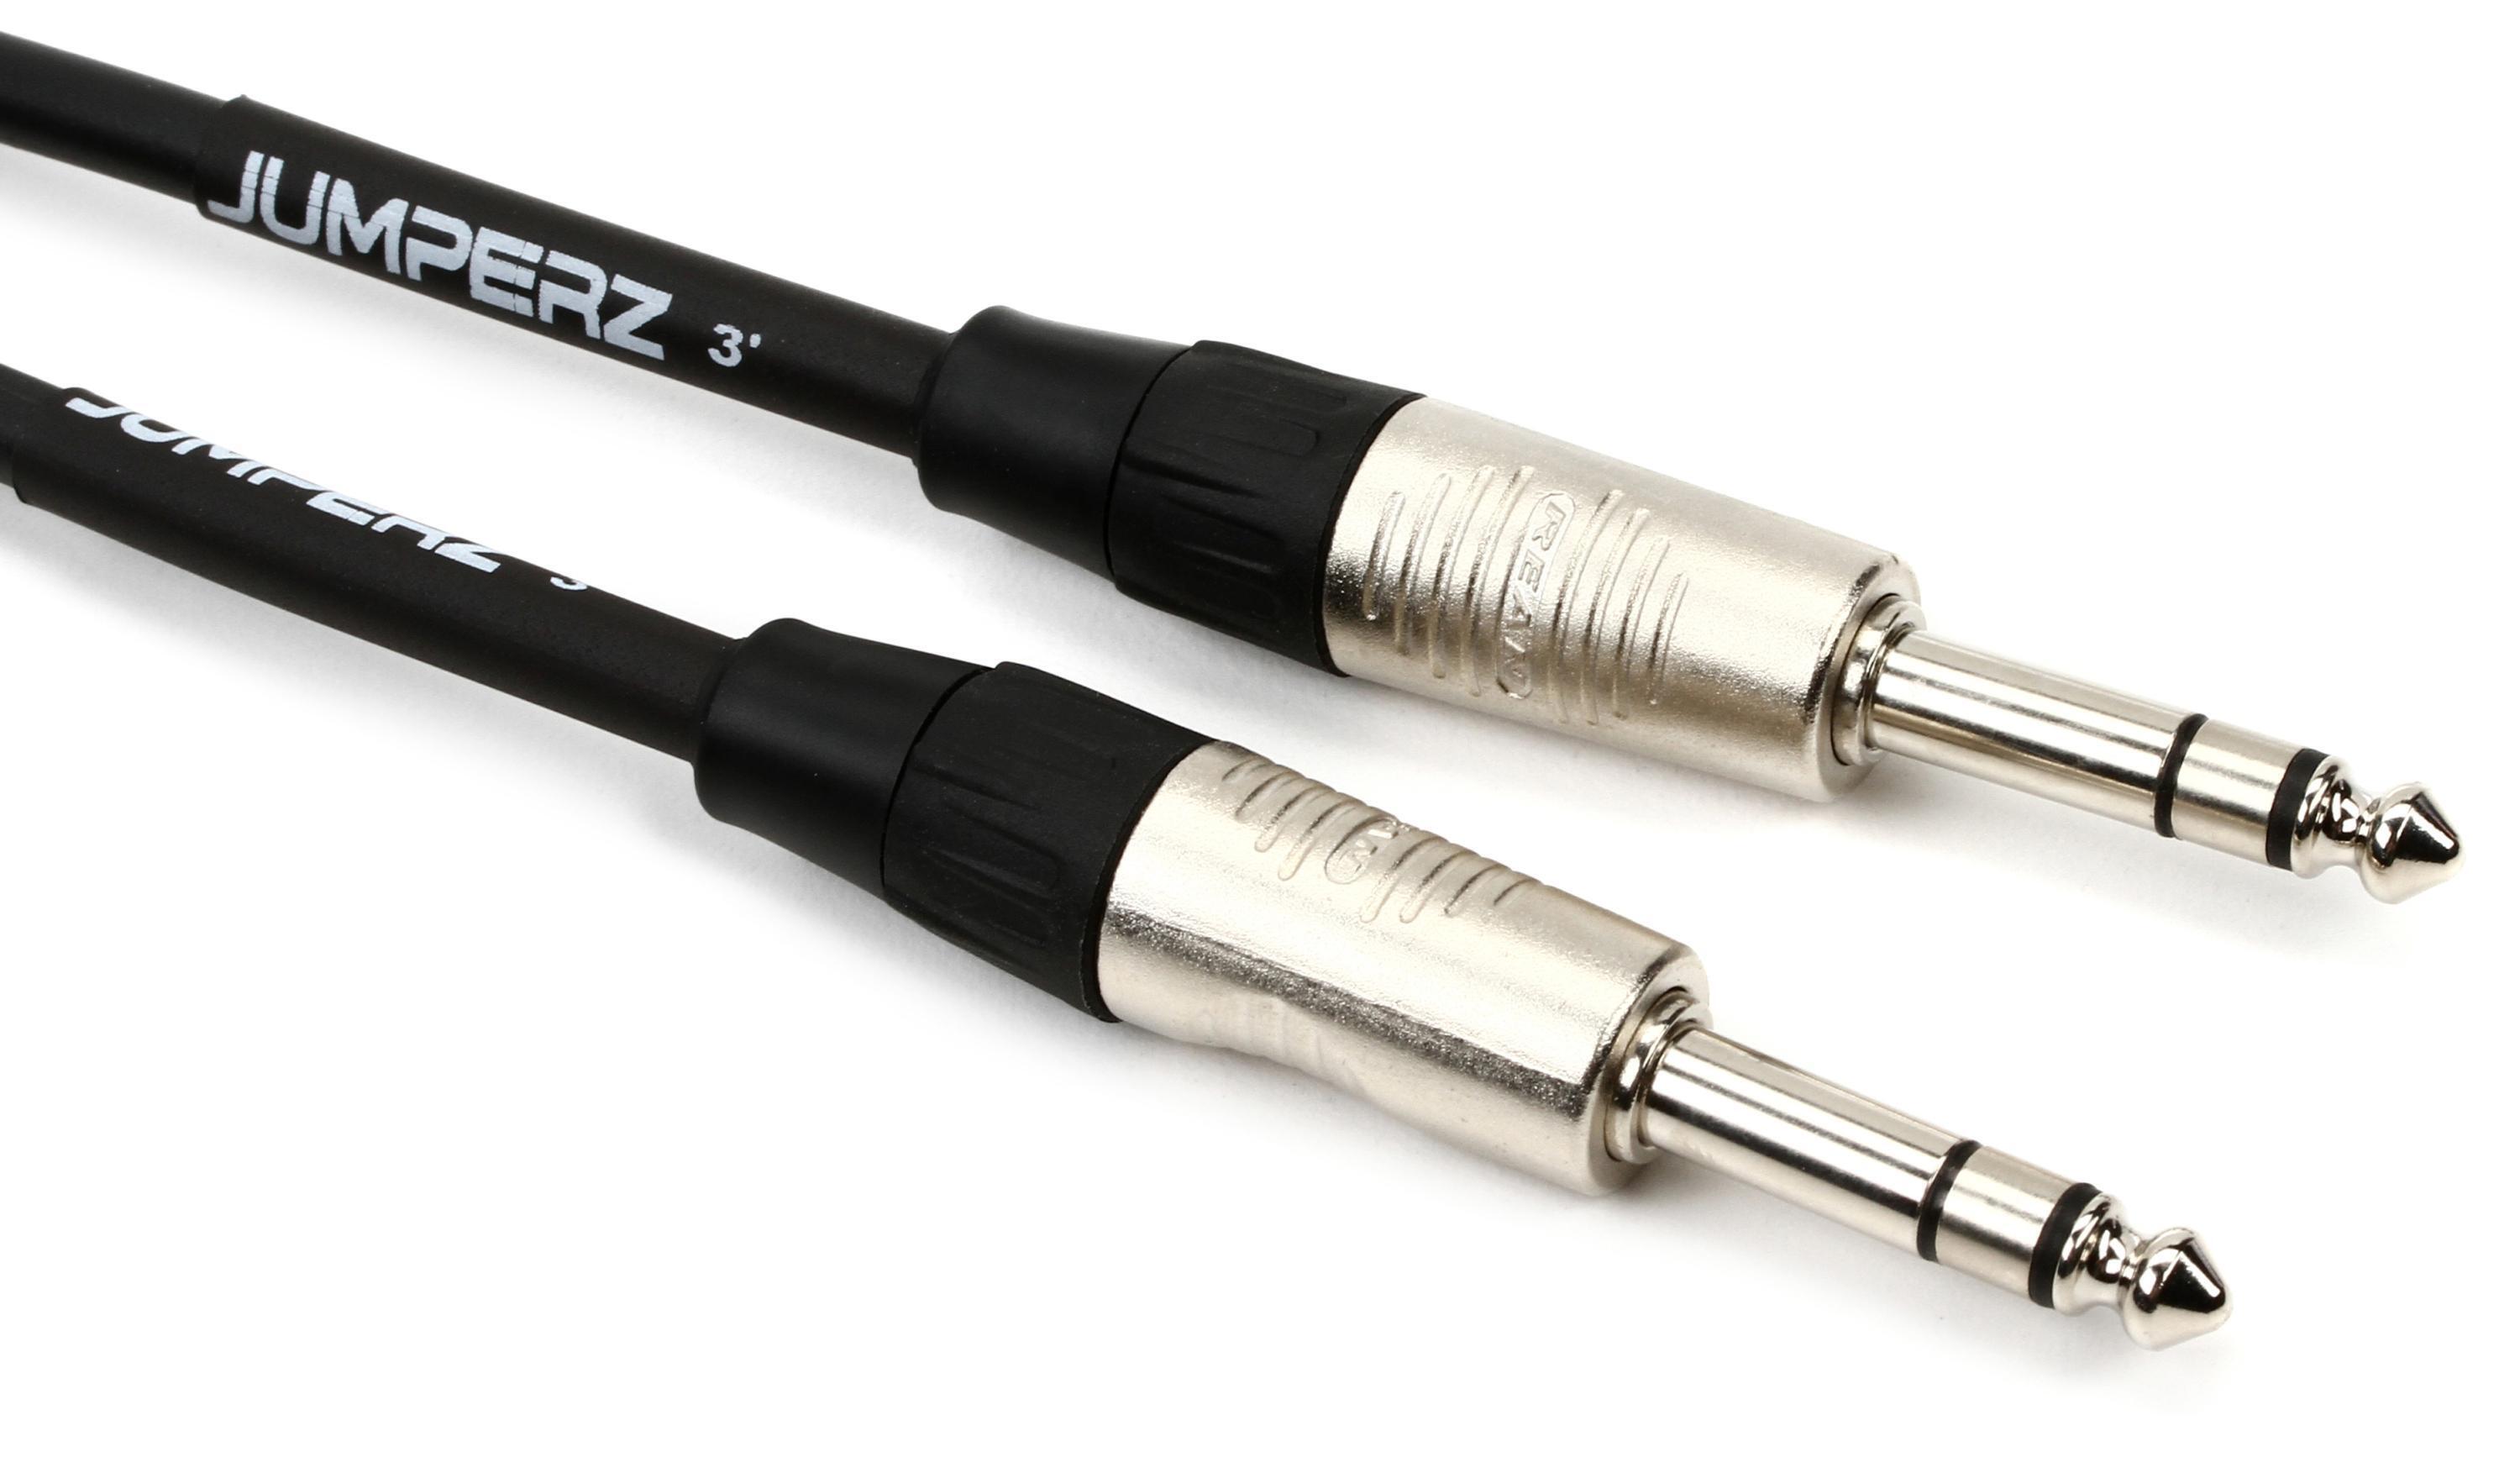 Bundled Item: JUMPERZ JB2TRS-3 Blue Line 1/4-inch TRS Male to 1/4-inch TRS Male Patch Cable - 3 foot